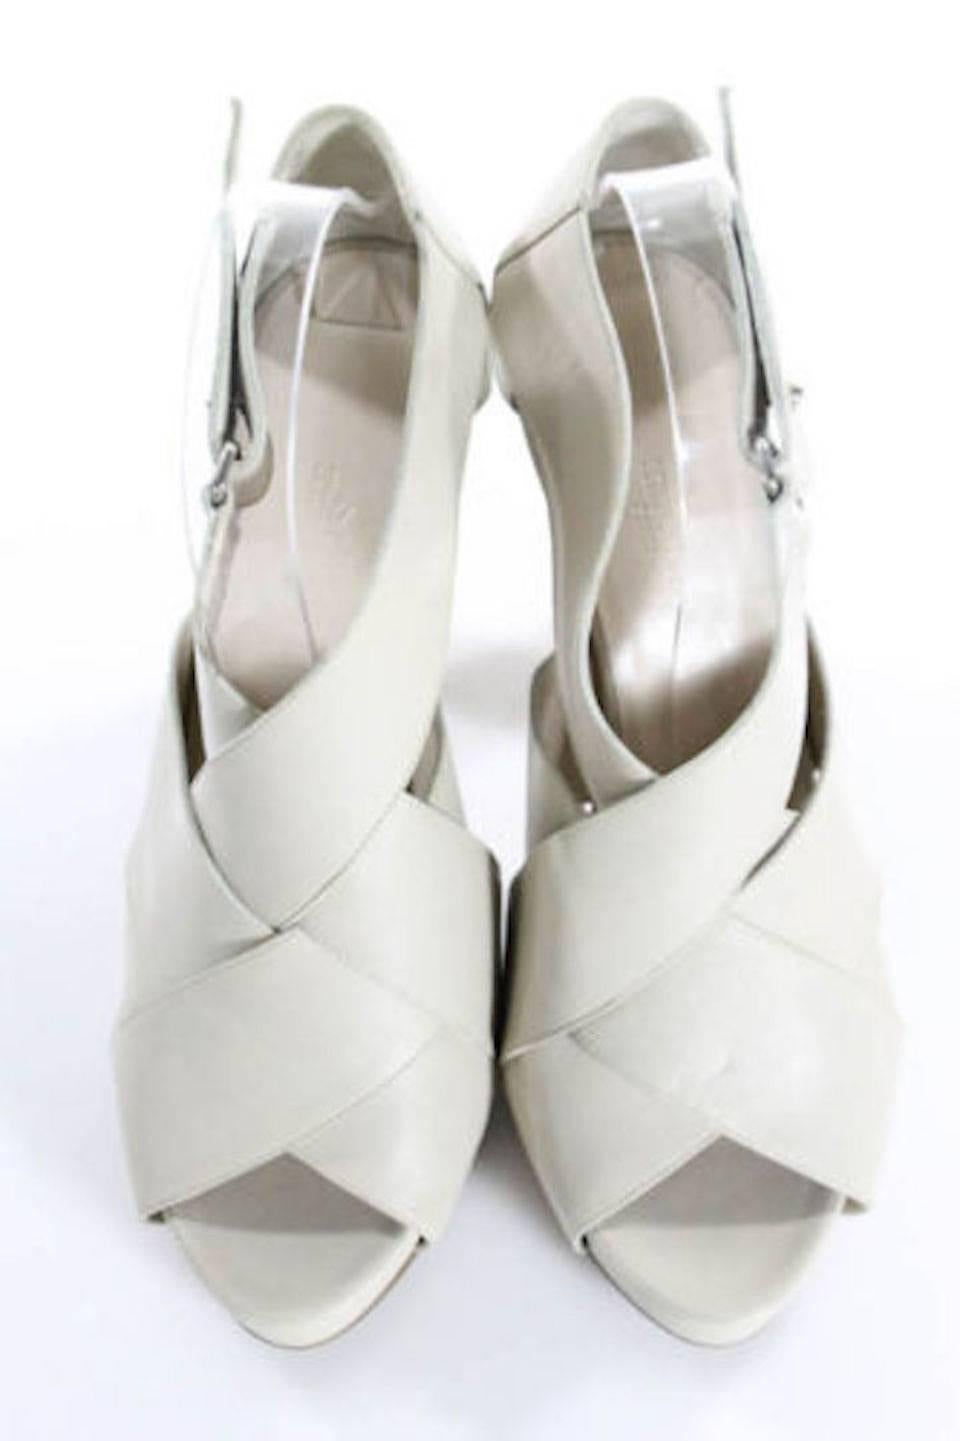 CURATOR'SNOTES

Size IT 40 (US 10) 
Leather
Silver hardware
Wooden heels
Made in Italy
Heel height 4.5